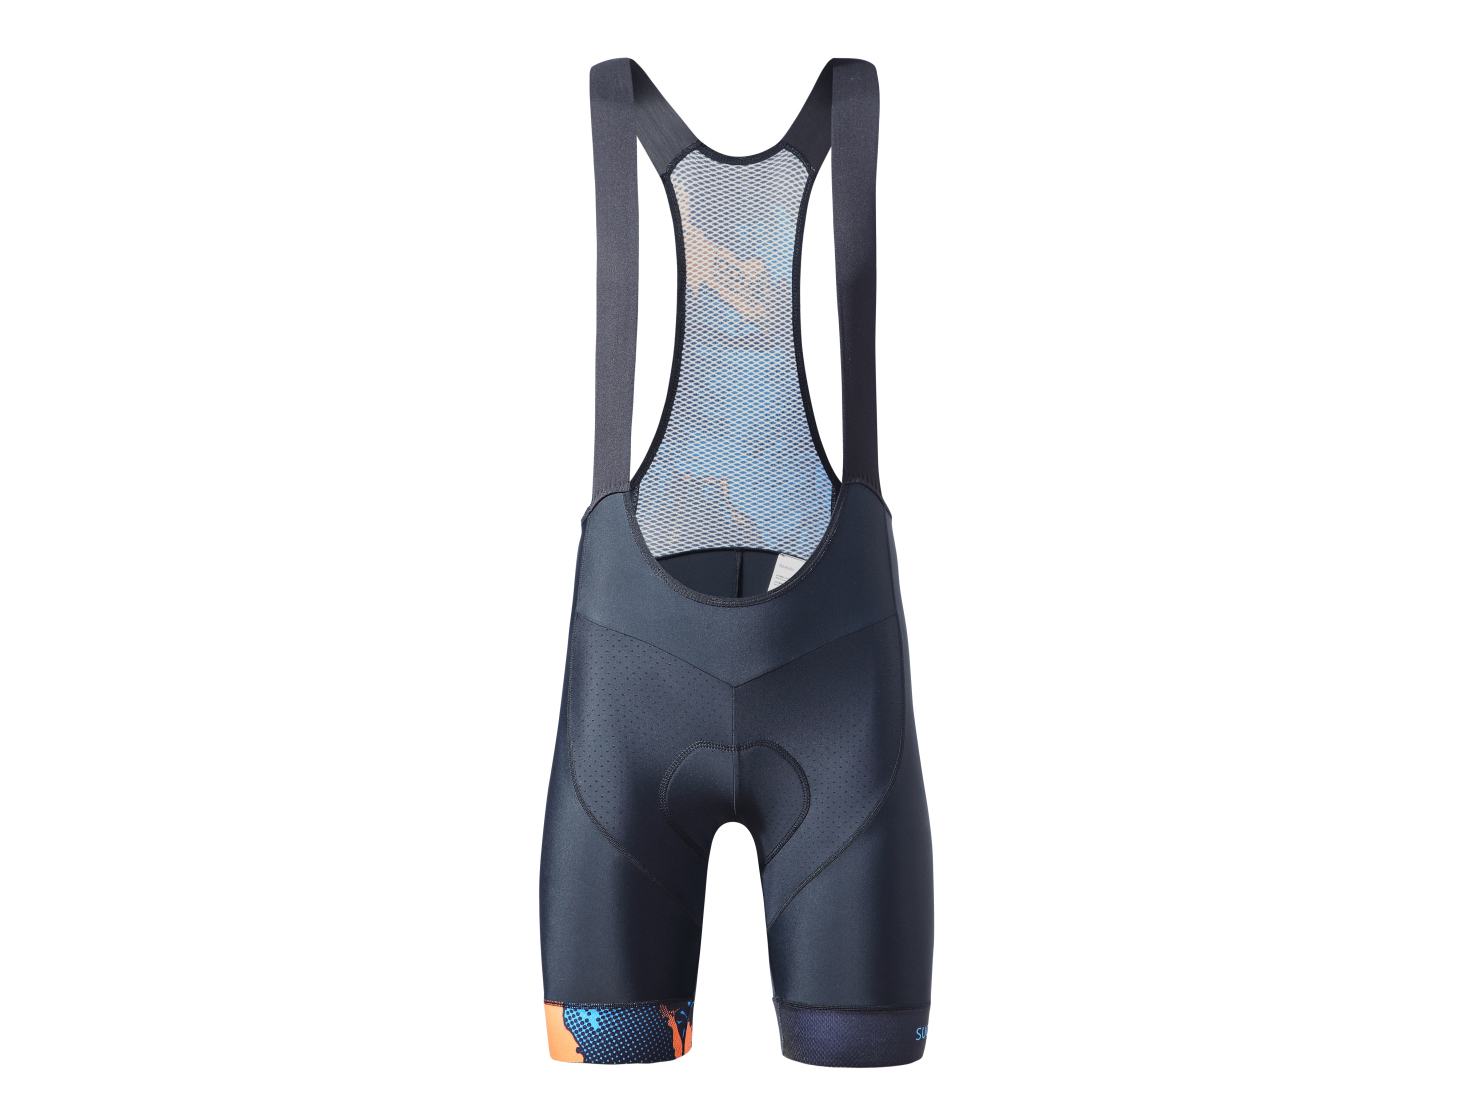 Men’s knitted bicycle Bib short with pad